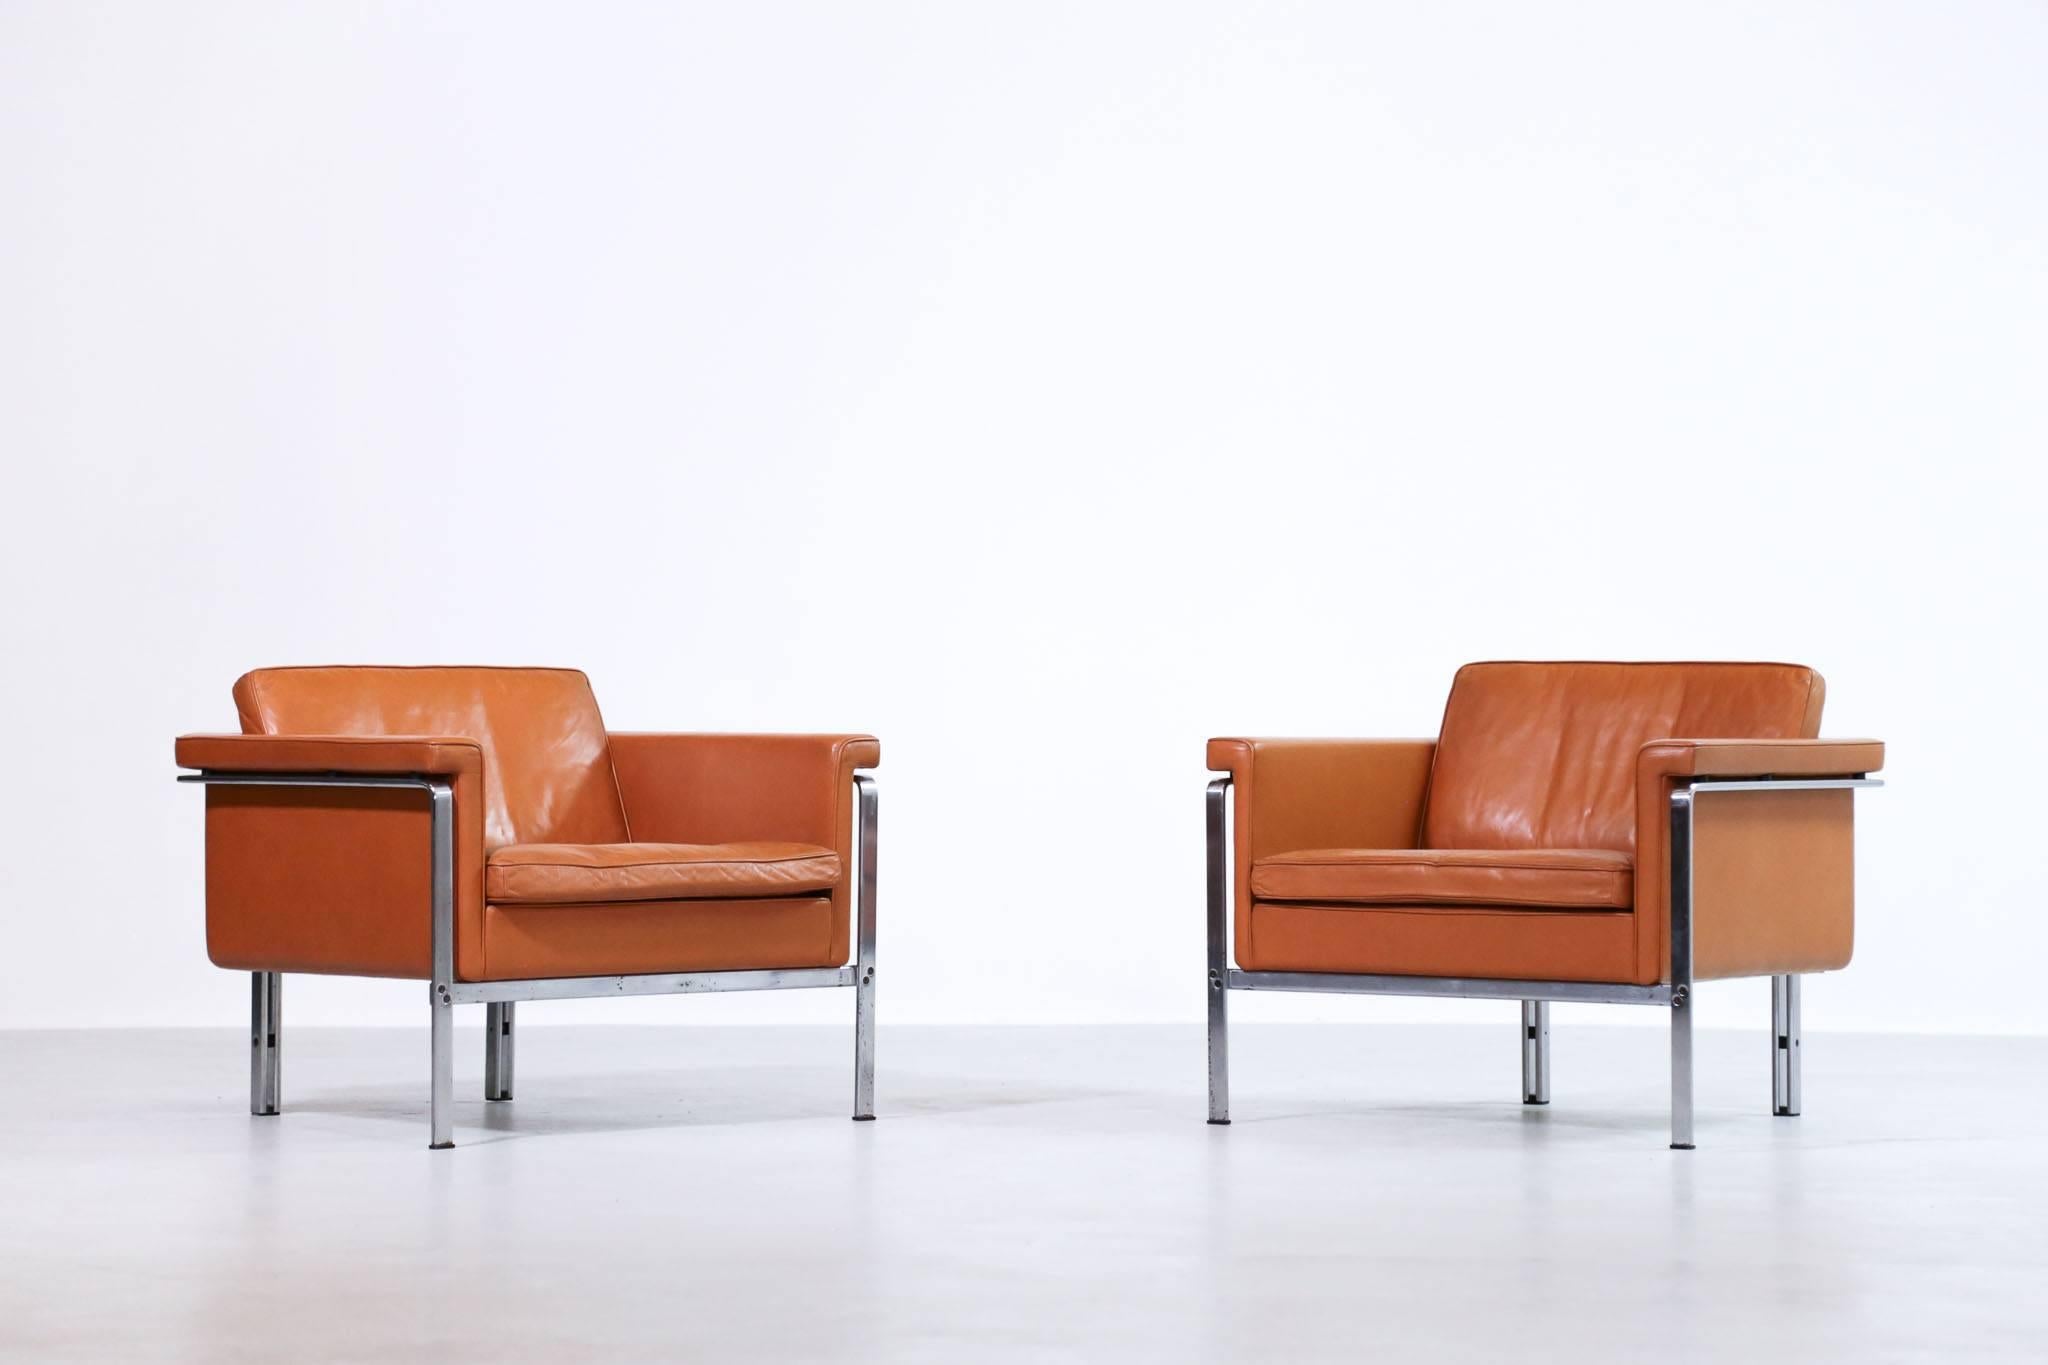 Nice pair of Horst Bruning lounge chairs.
Made of steel and camel/orange leather.